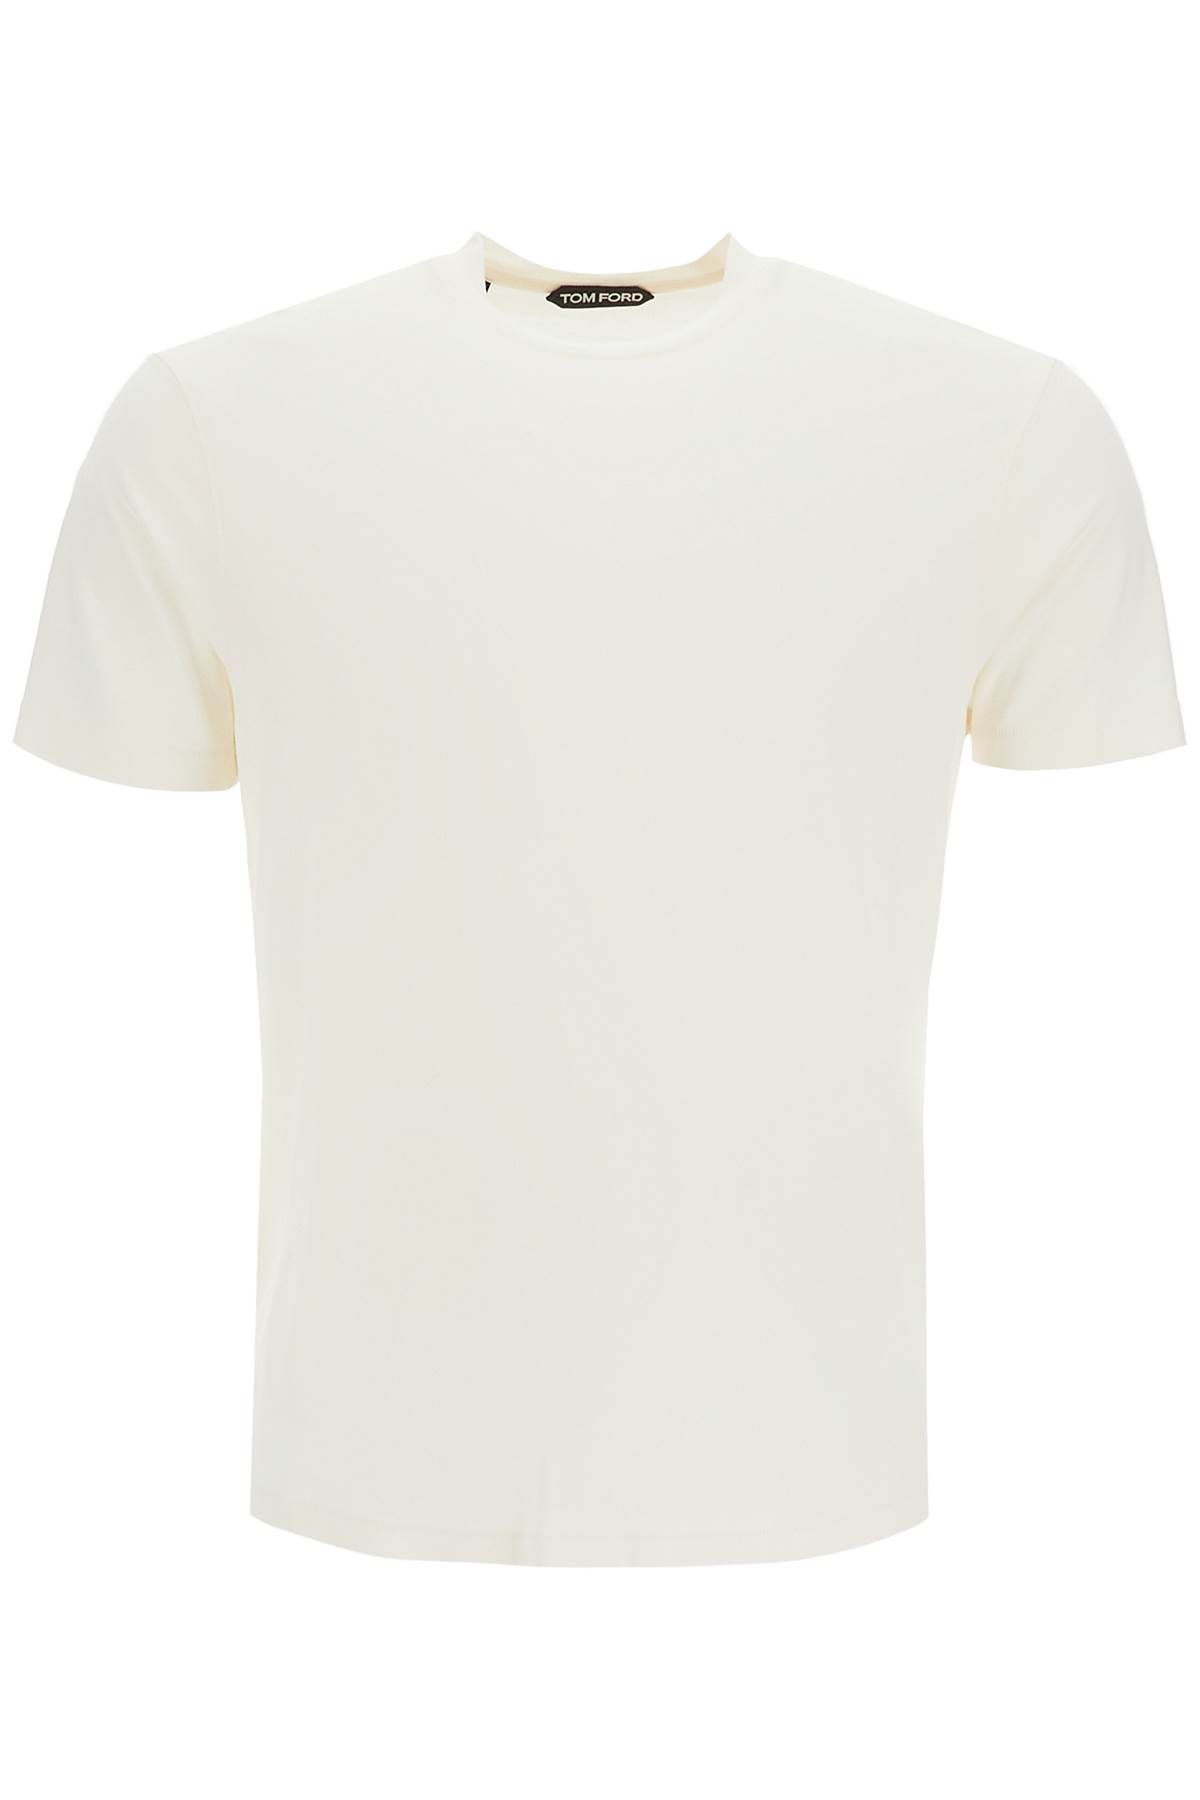 Tom Ford TOM FORD cottono and lyocell t-shirt